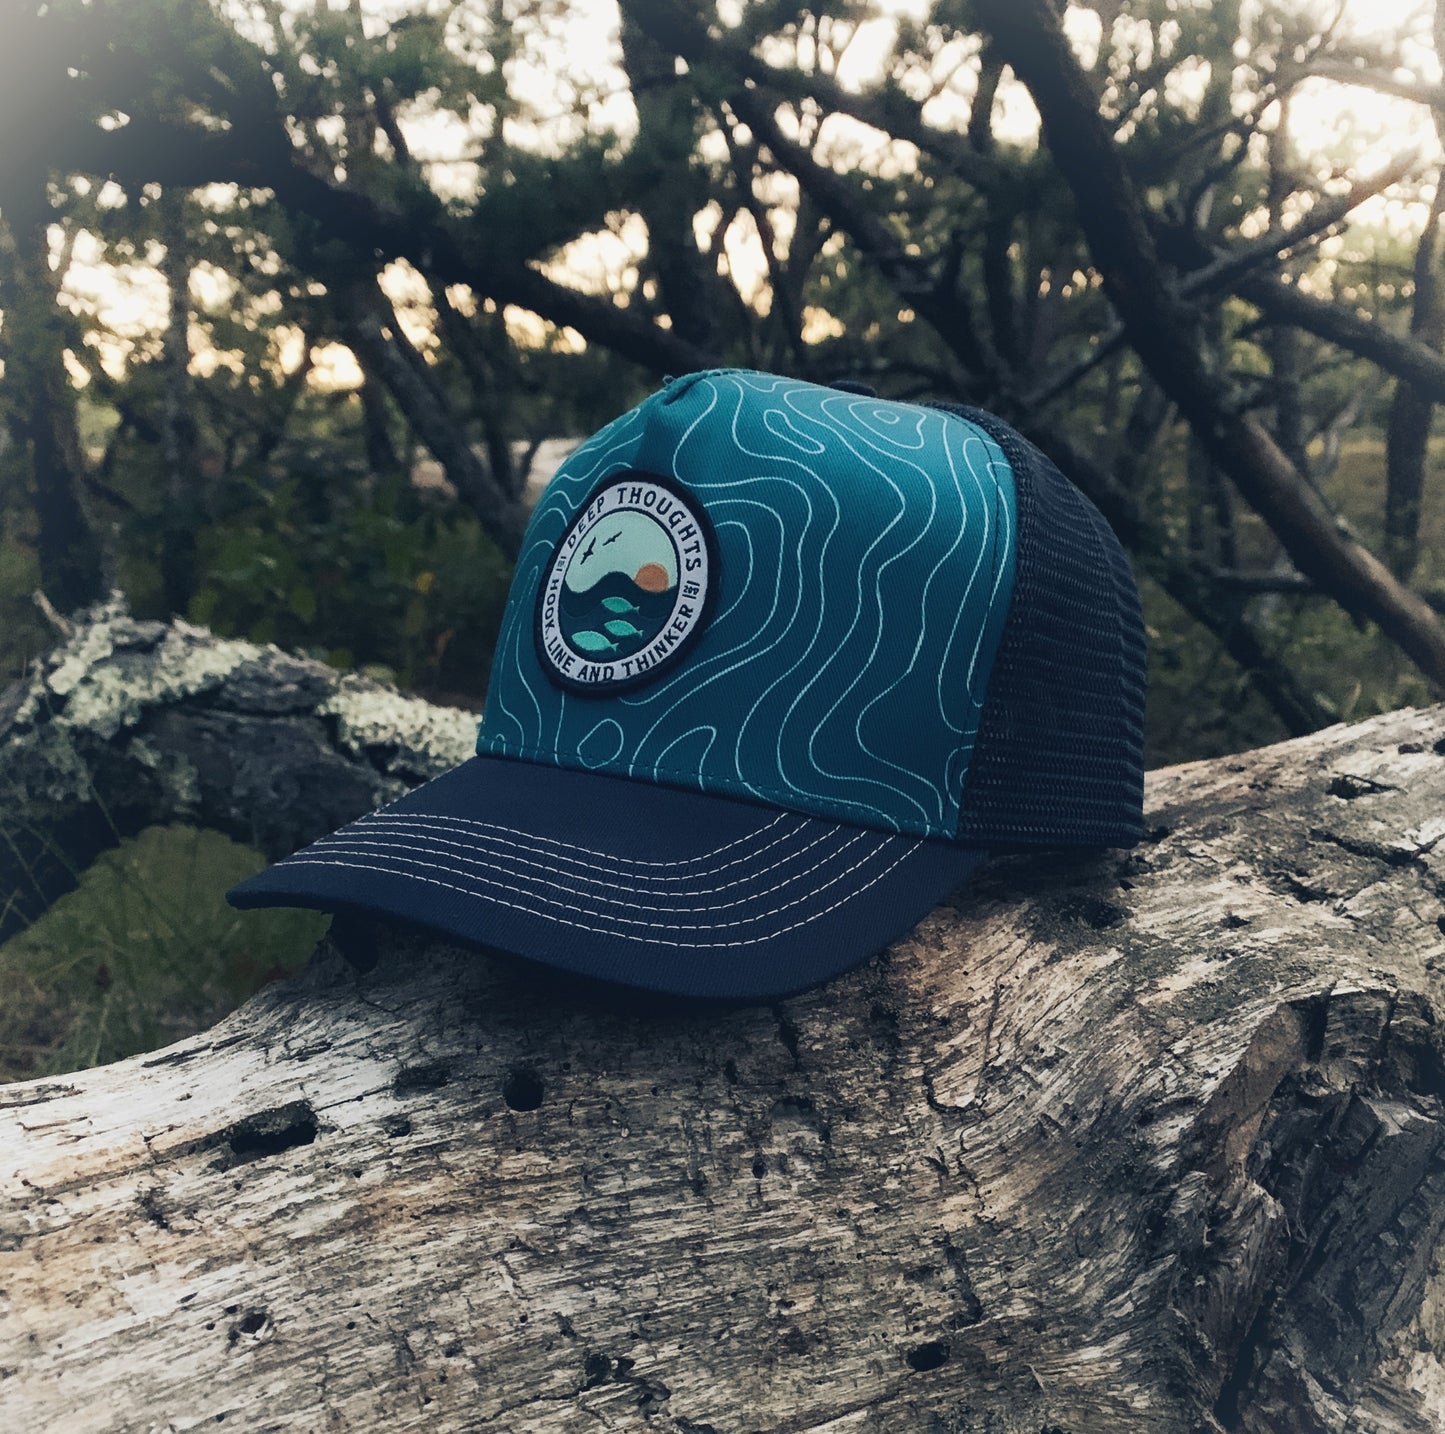 aquamarine and navy blue trucker hat with round patch depicting ocean swells with fish beneath the waves